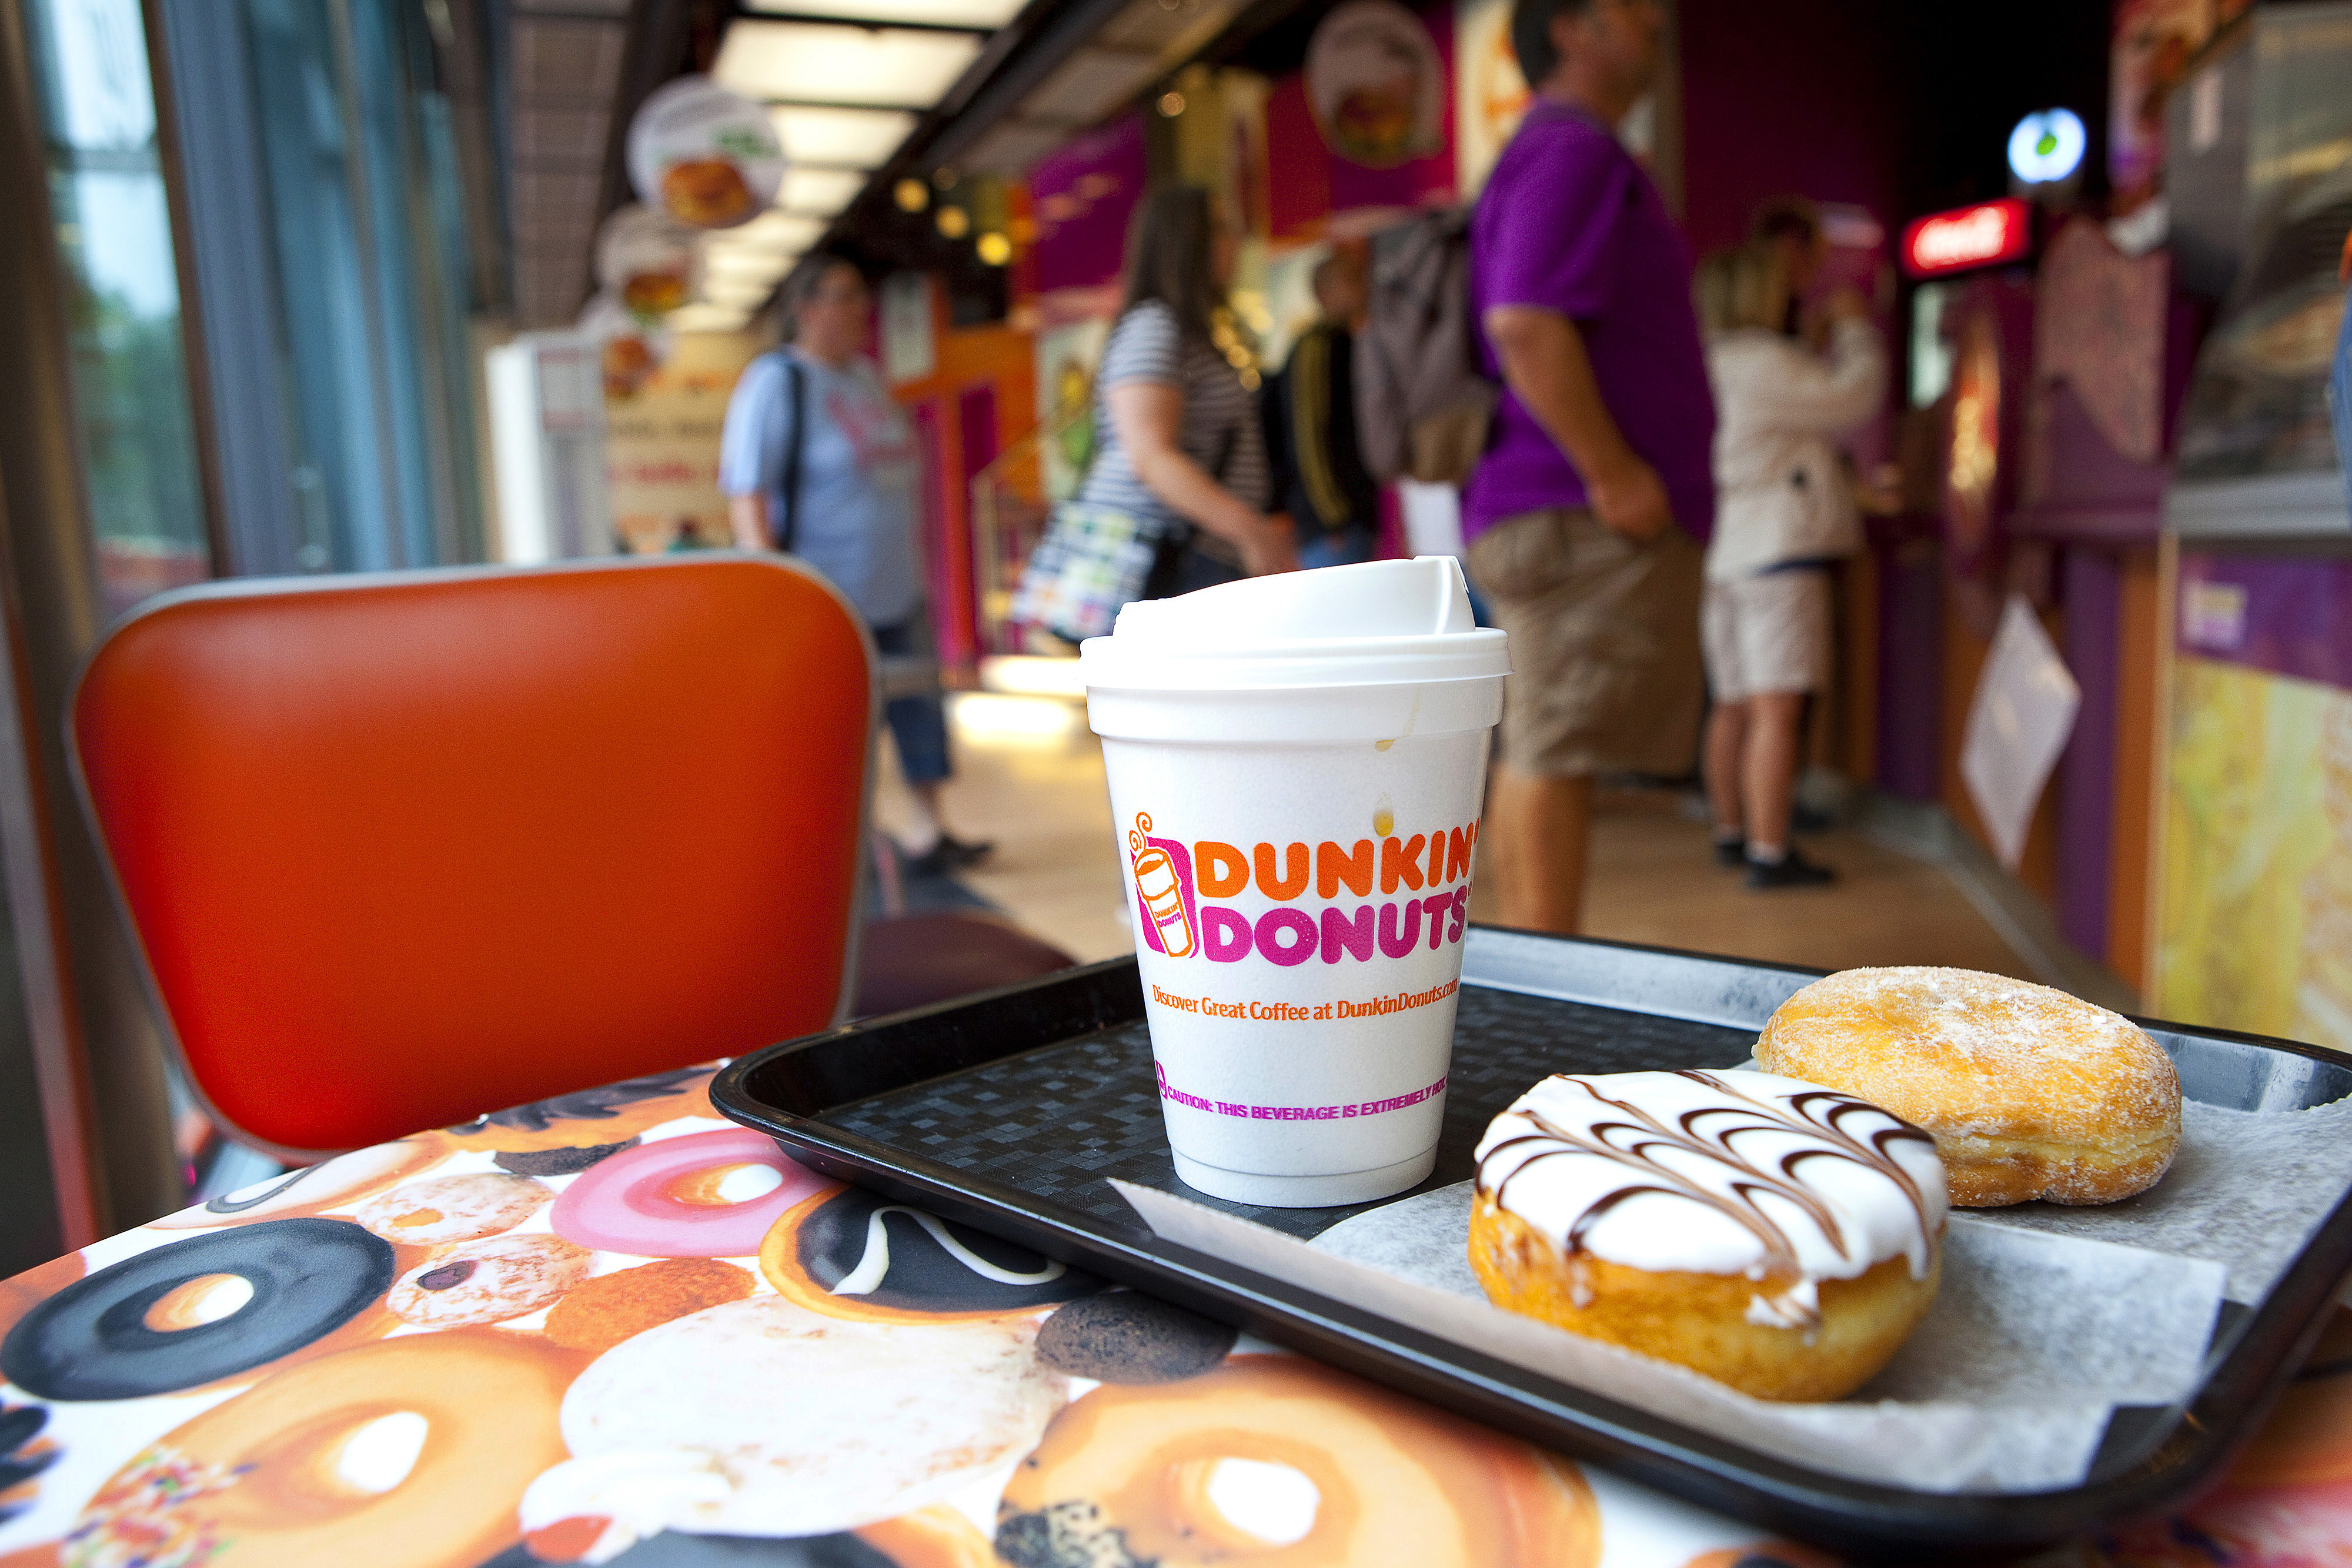 Dunkin’ Donuts Just Introduced ‘Donut Fries’ and Everyone Already Loves Them